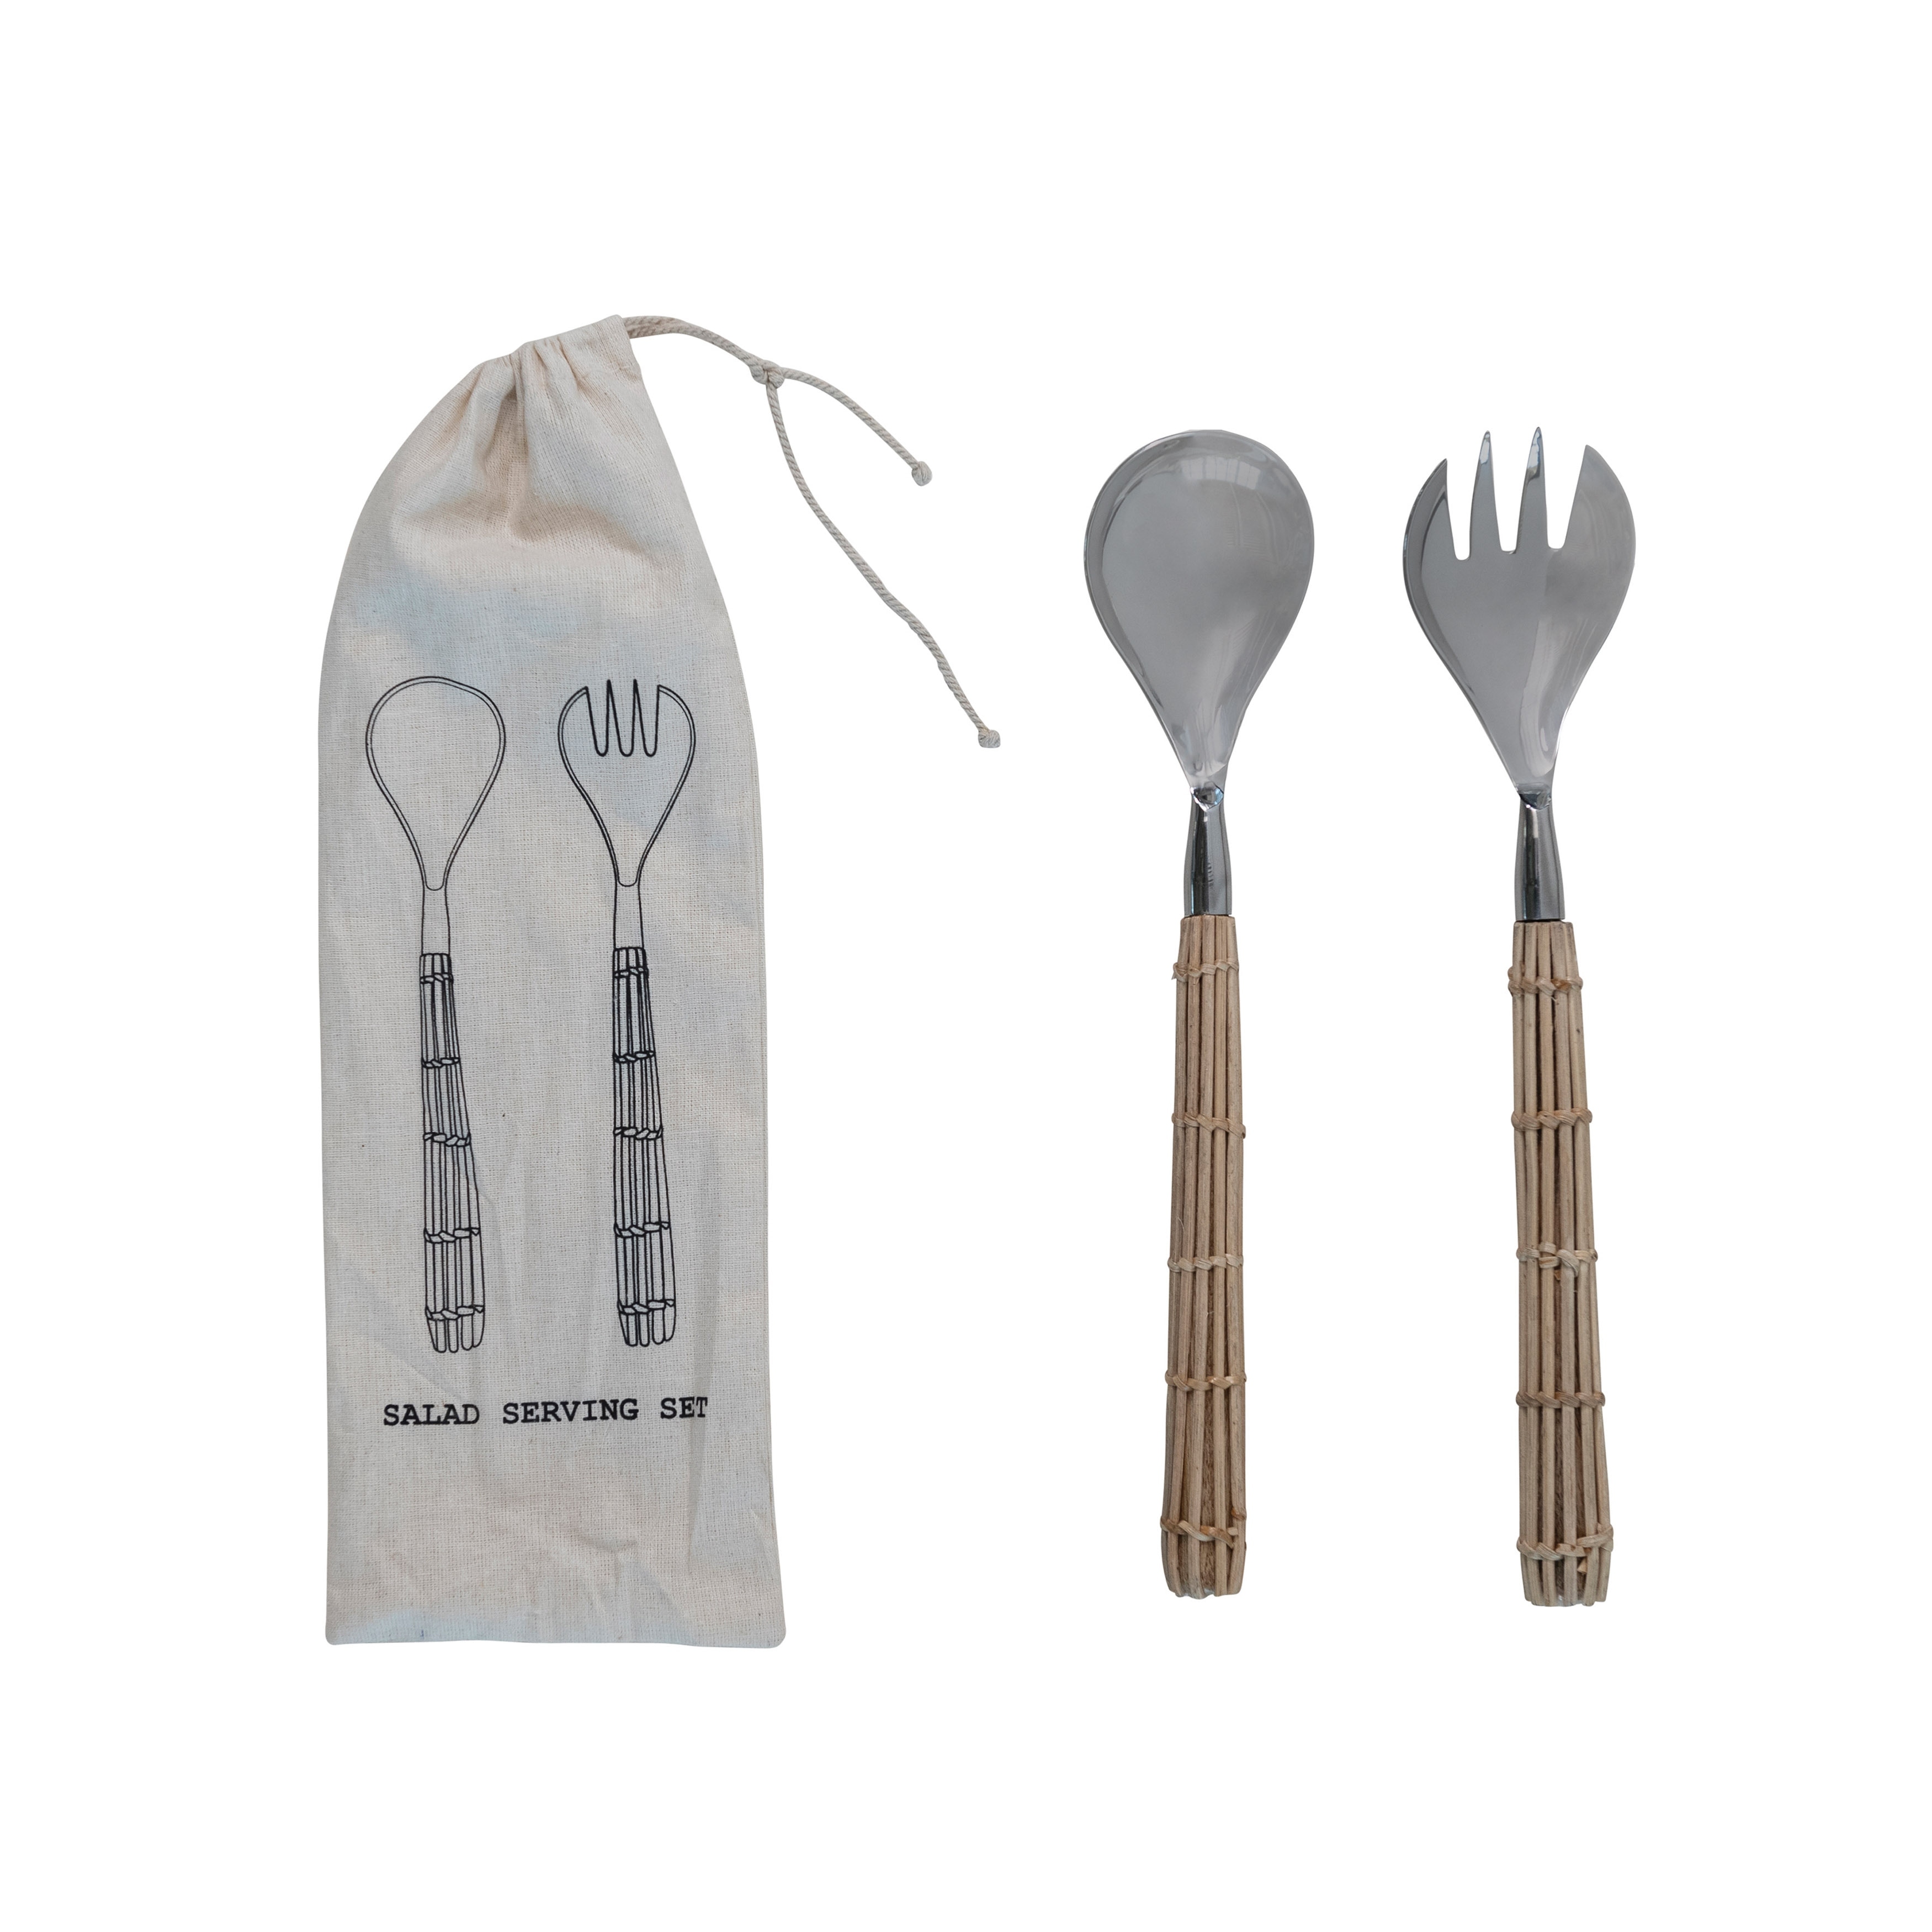 https://ak1.ostkcdn.com/images/products/is/images/direct/7e7d878e900317fc1e06ffde73f7f32e9828a0e2/Stainless-Steel-Salad-Servers-with-Rattan-Wrapped-Handles.jpg